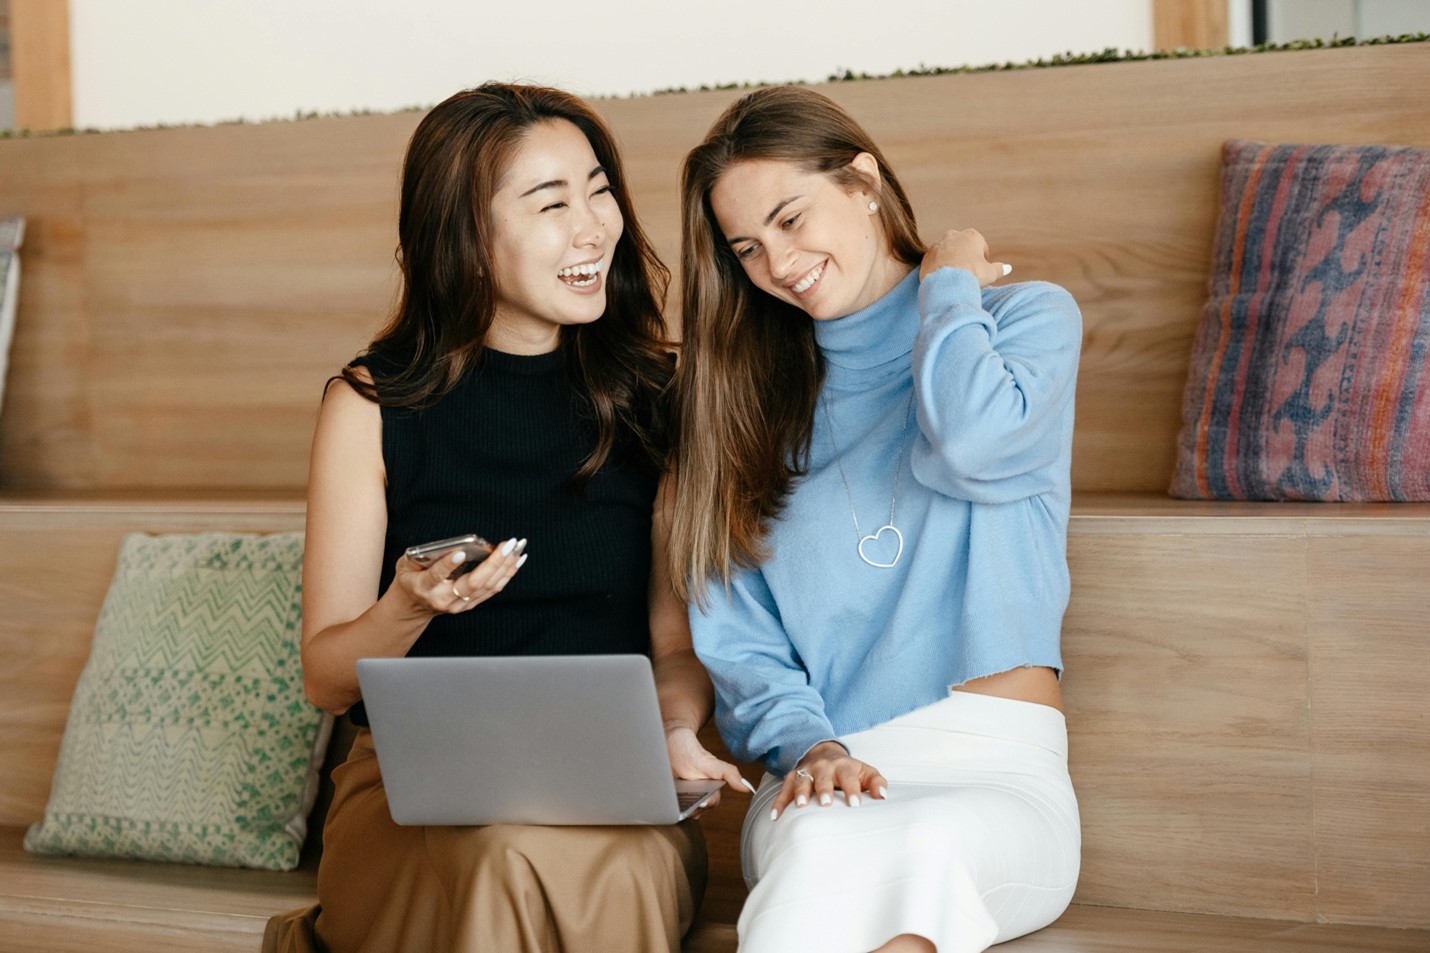 Two women sitting on a couch, laughing while looking at a laptop screen. One of them has a cell phone in her right hand. They’re using their home WiFi connection to access the internet.